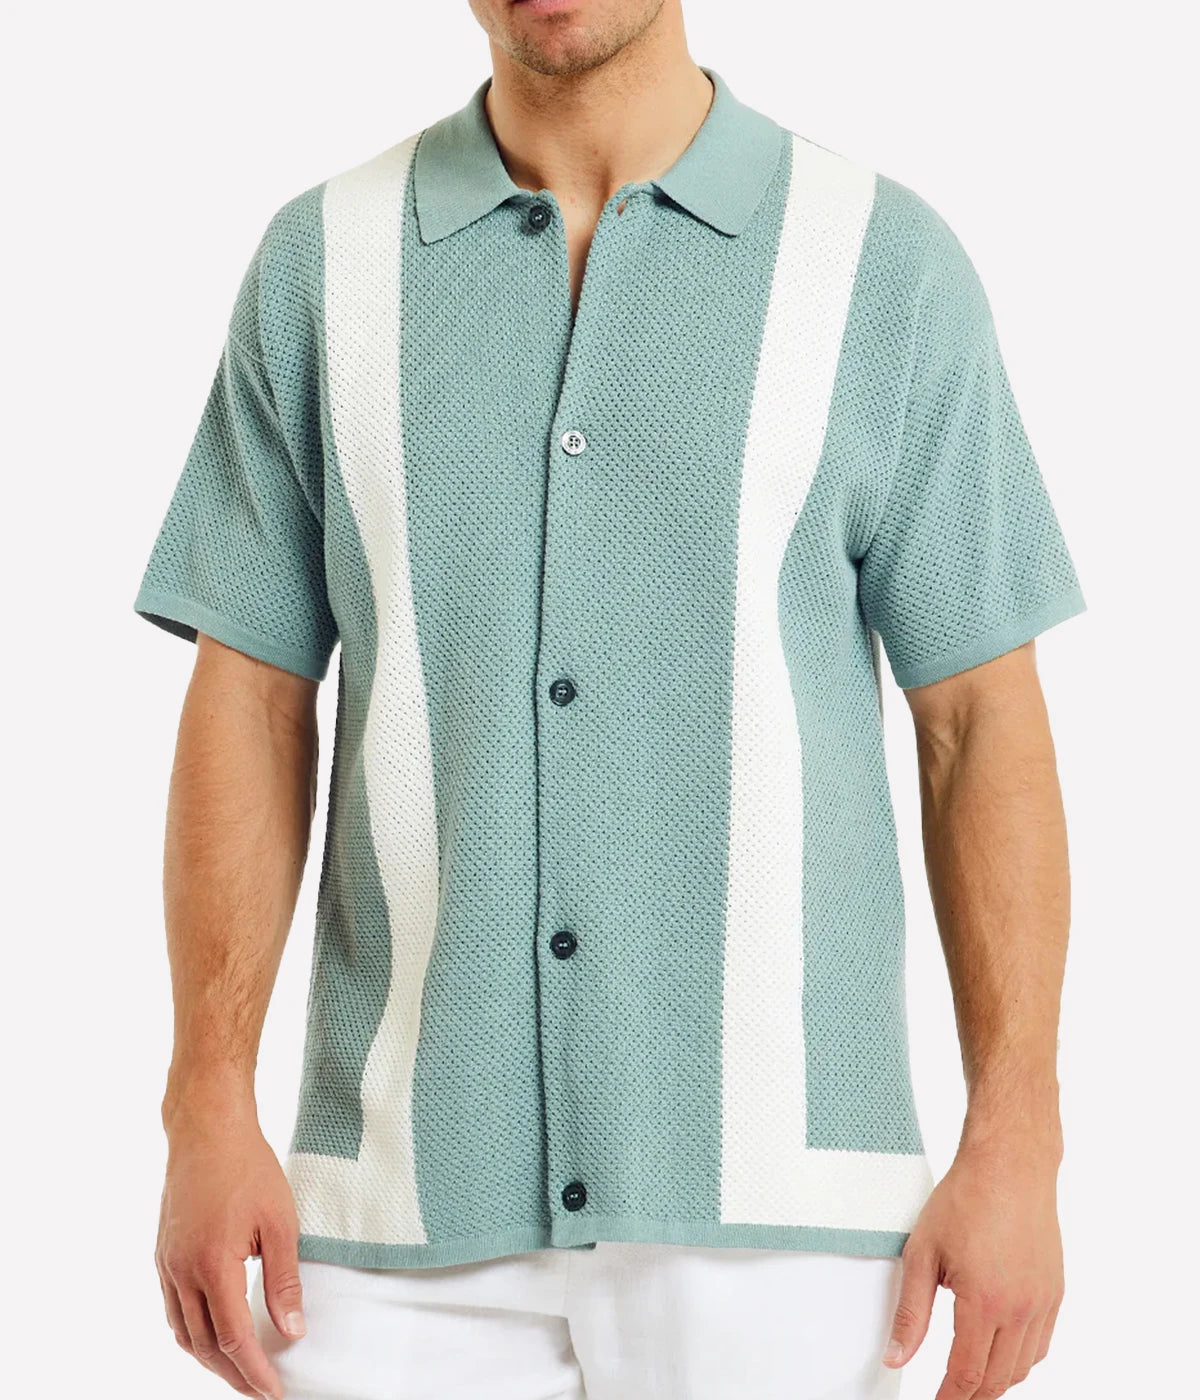 Barretos Short Sleeve Knitted Cardigan in Cloud Blue